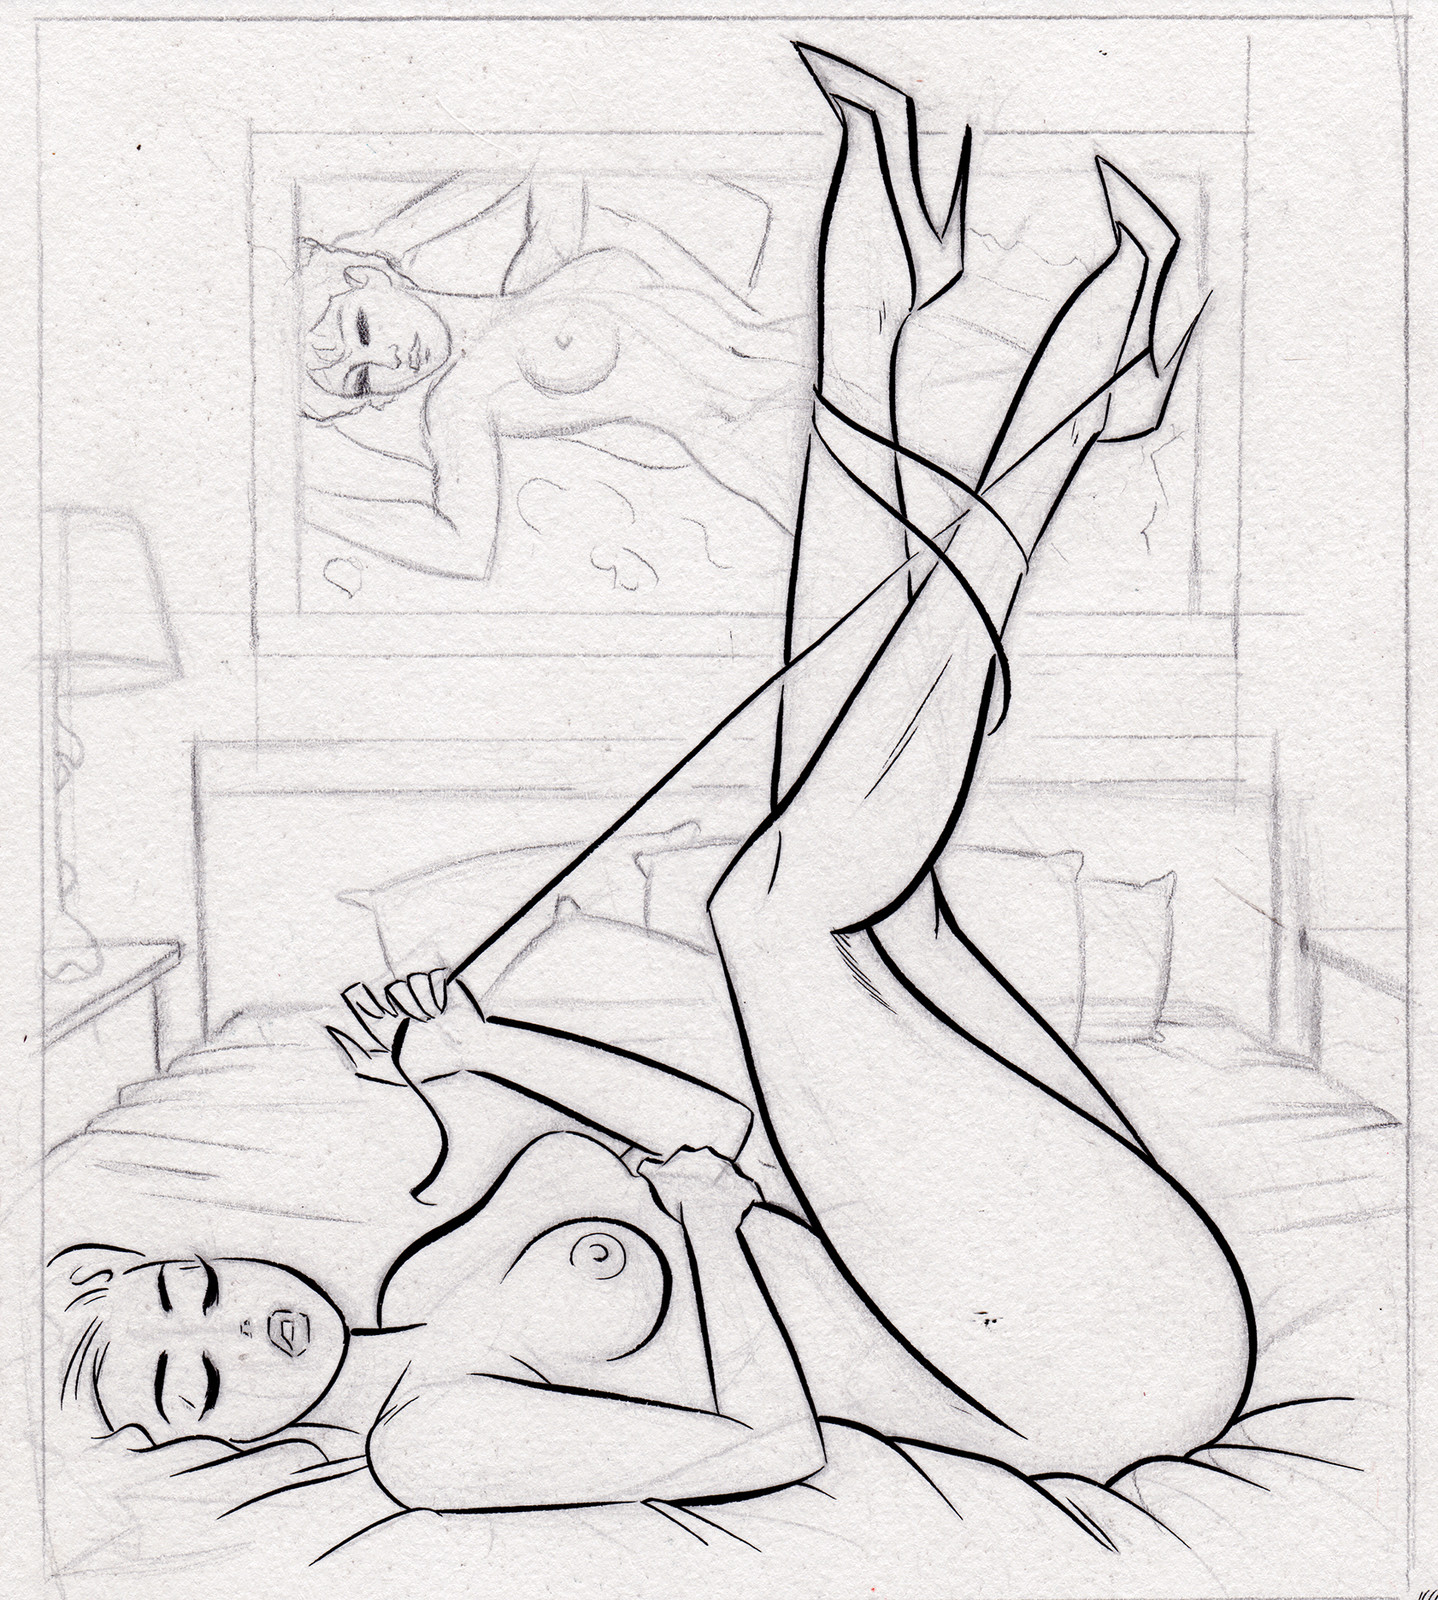 Lady inks done. Background pencils next.